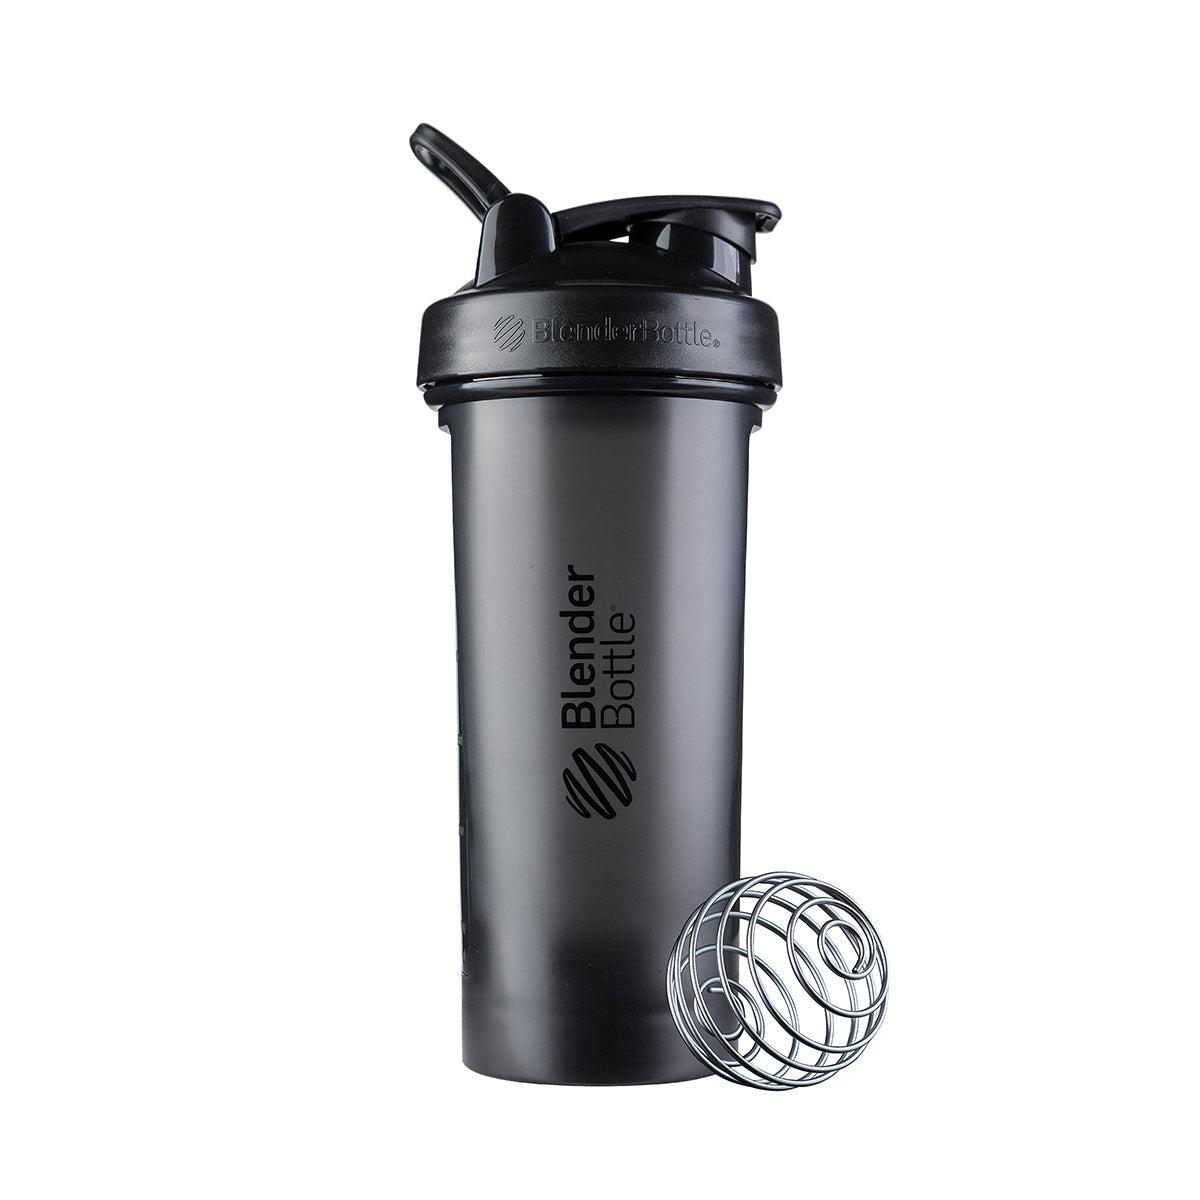 BlenderBottle Classic V2 Shaker Cup - 28 oz.-Protein Mixer-Pro Sports